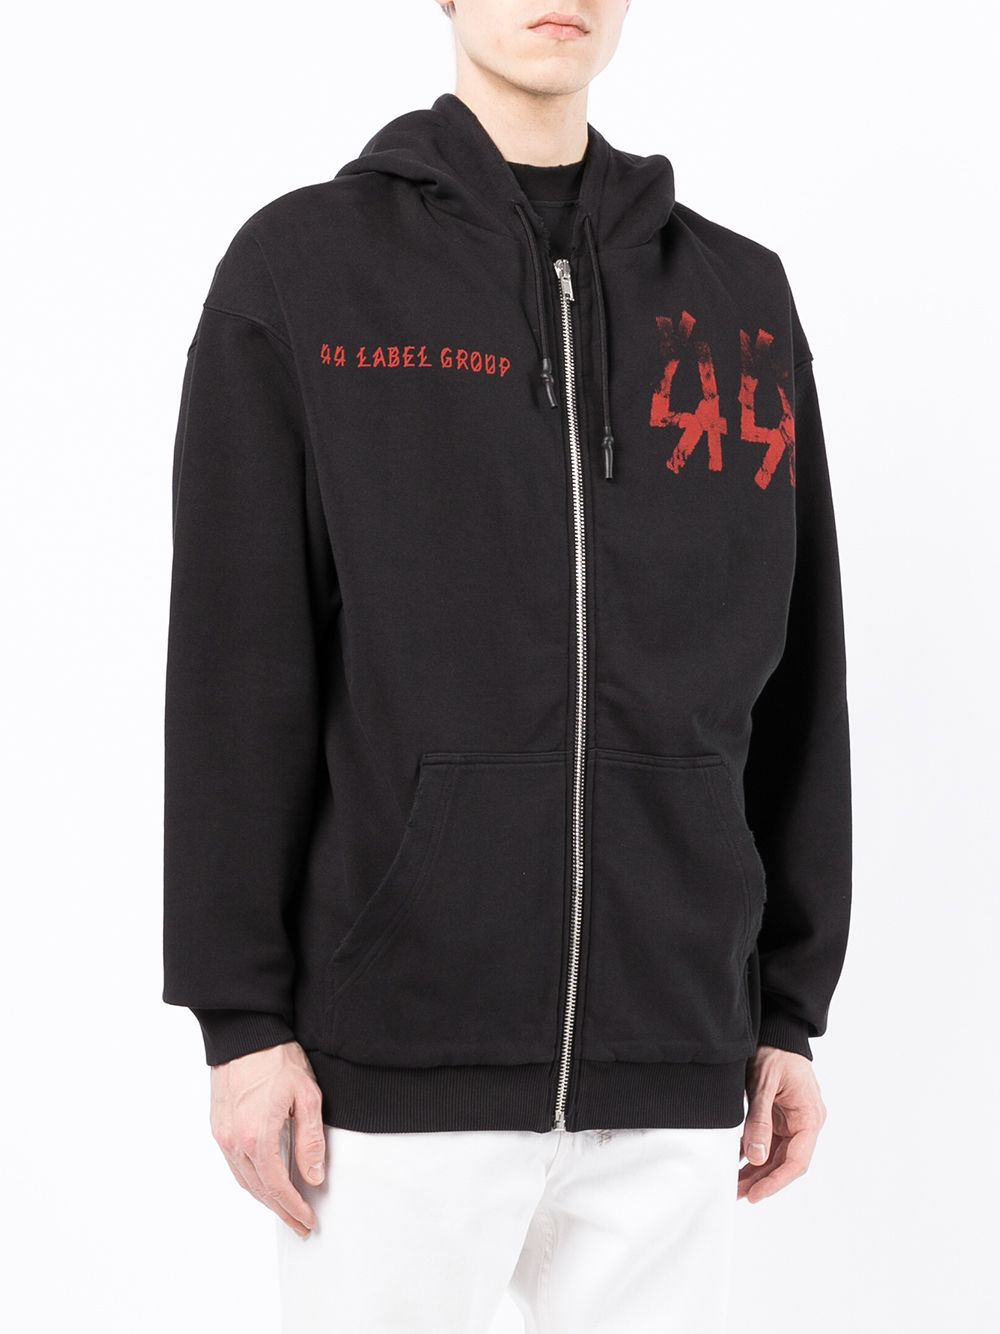 44 LABEL GROUP Spine zip-front Hoodie - Farfetch